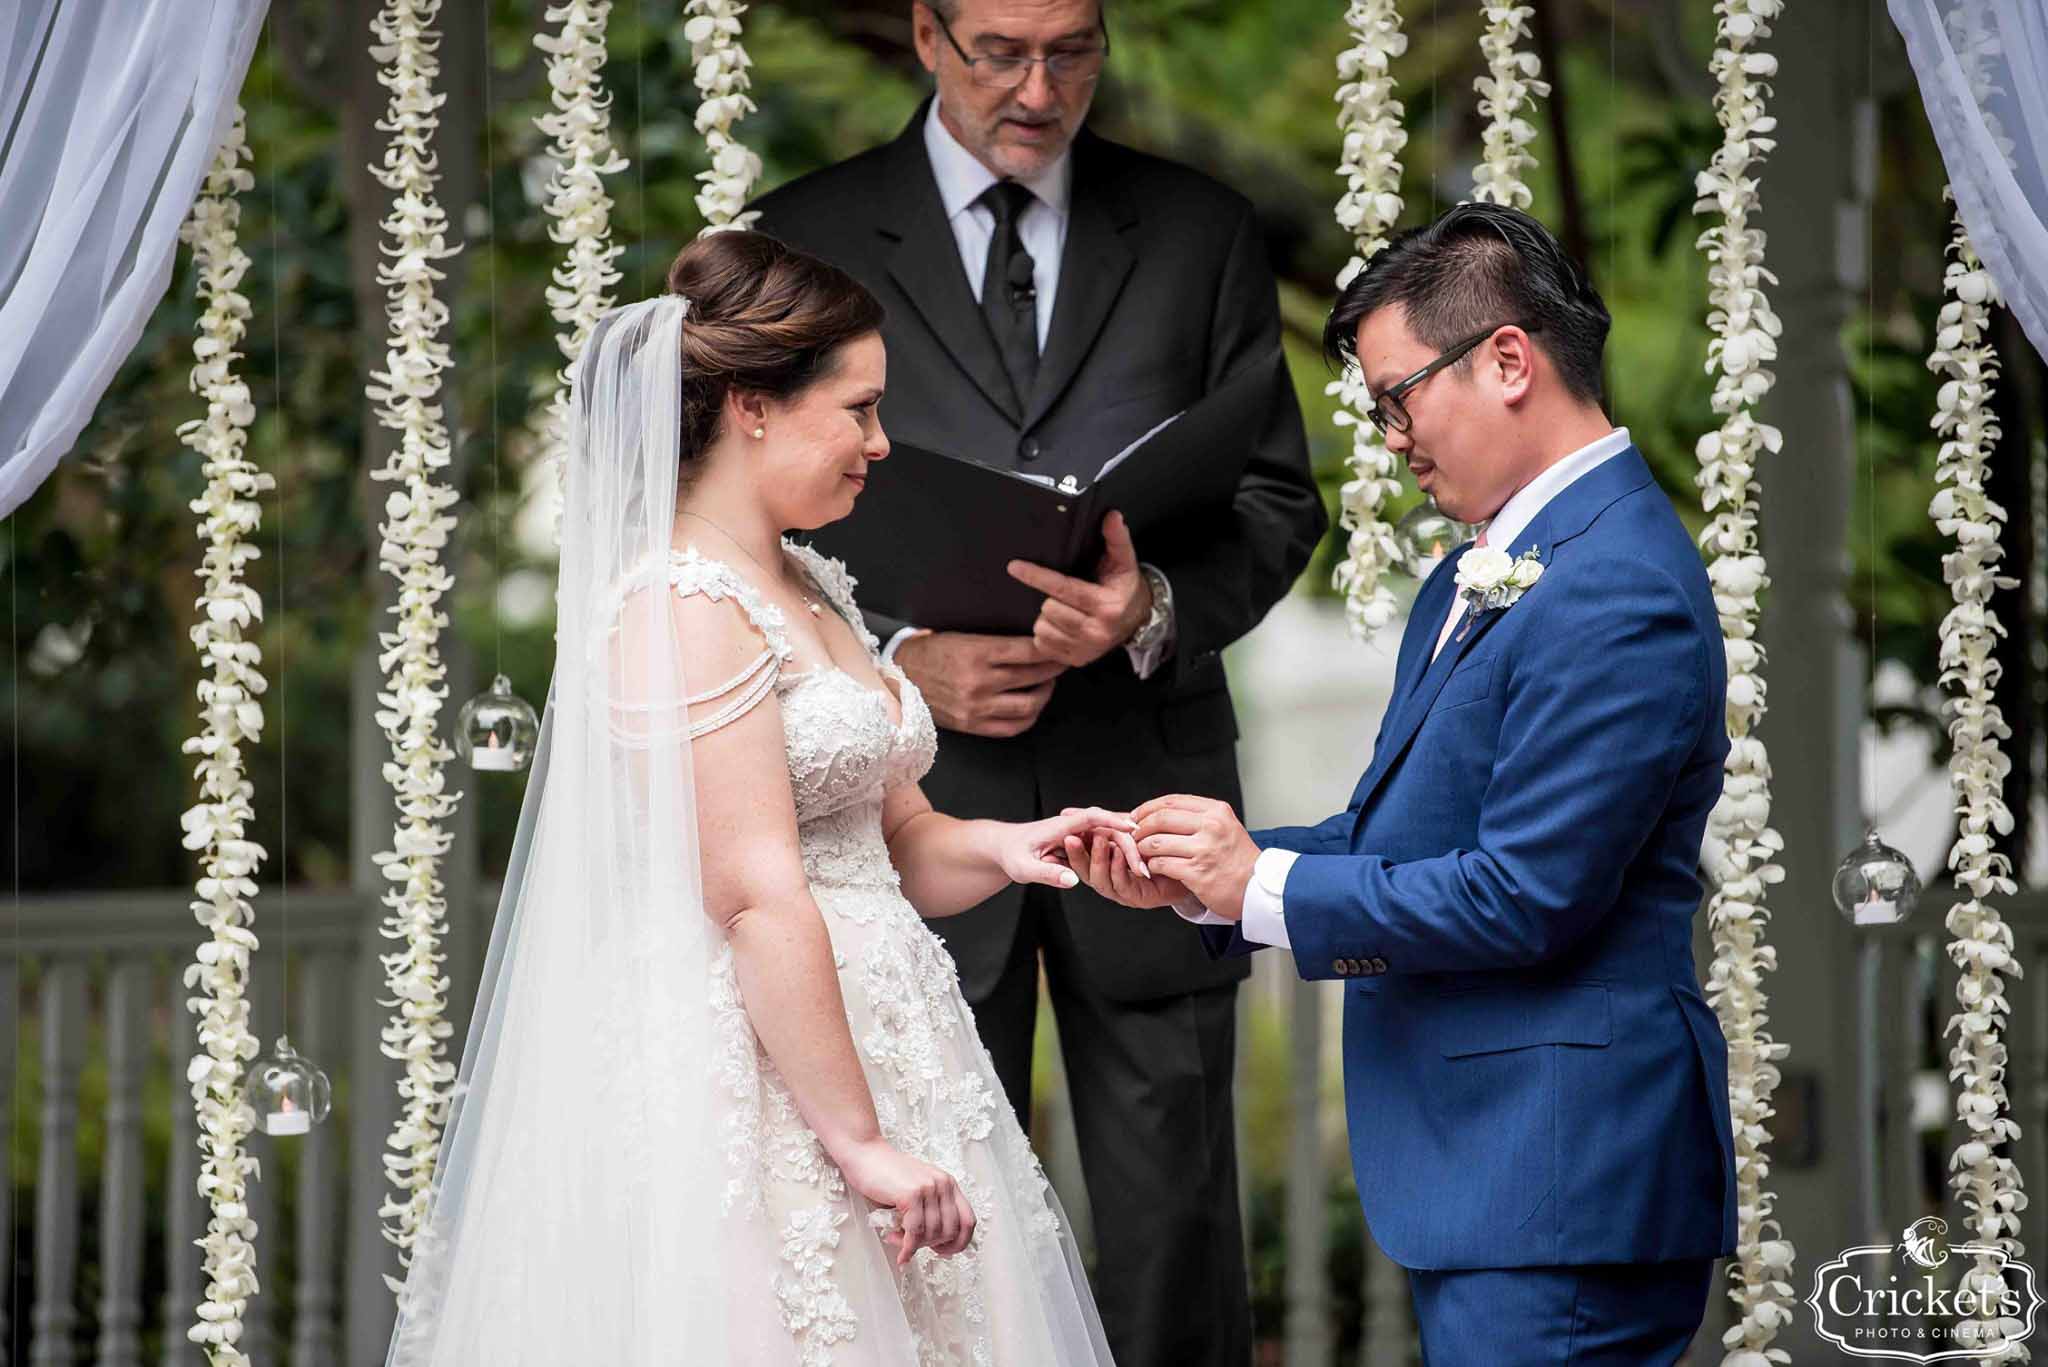 Wedding Ceremony Outline: Each Part of the Ceremony, Explained